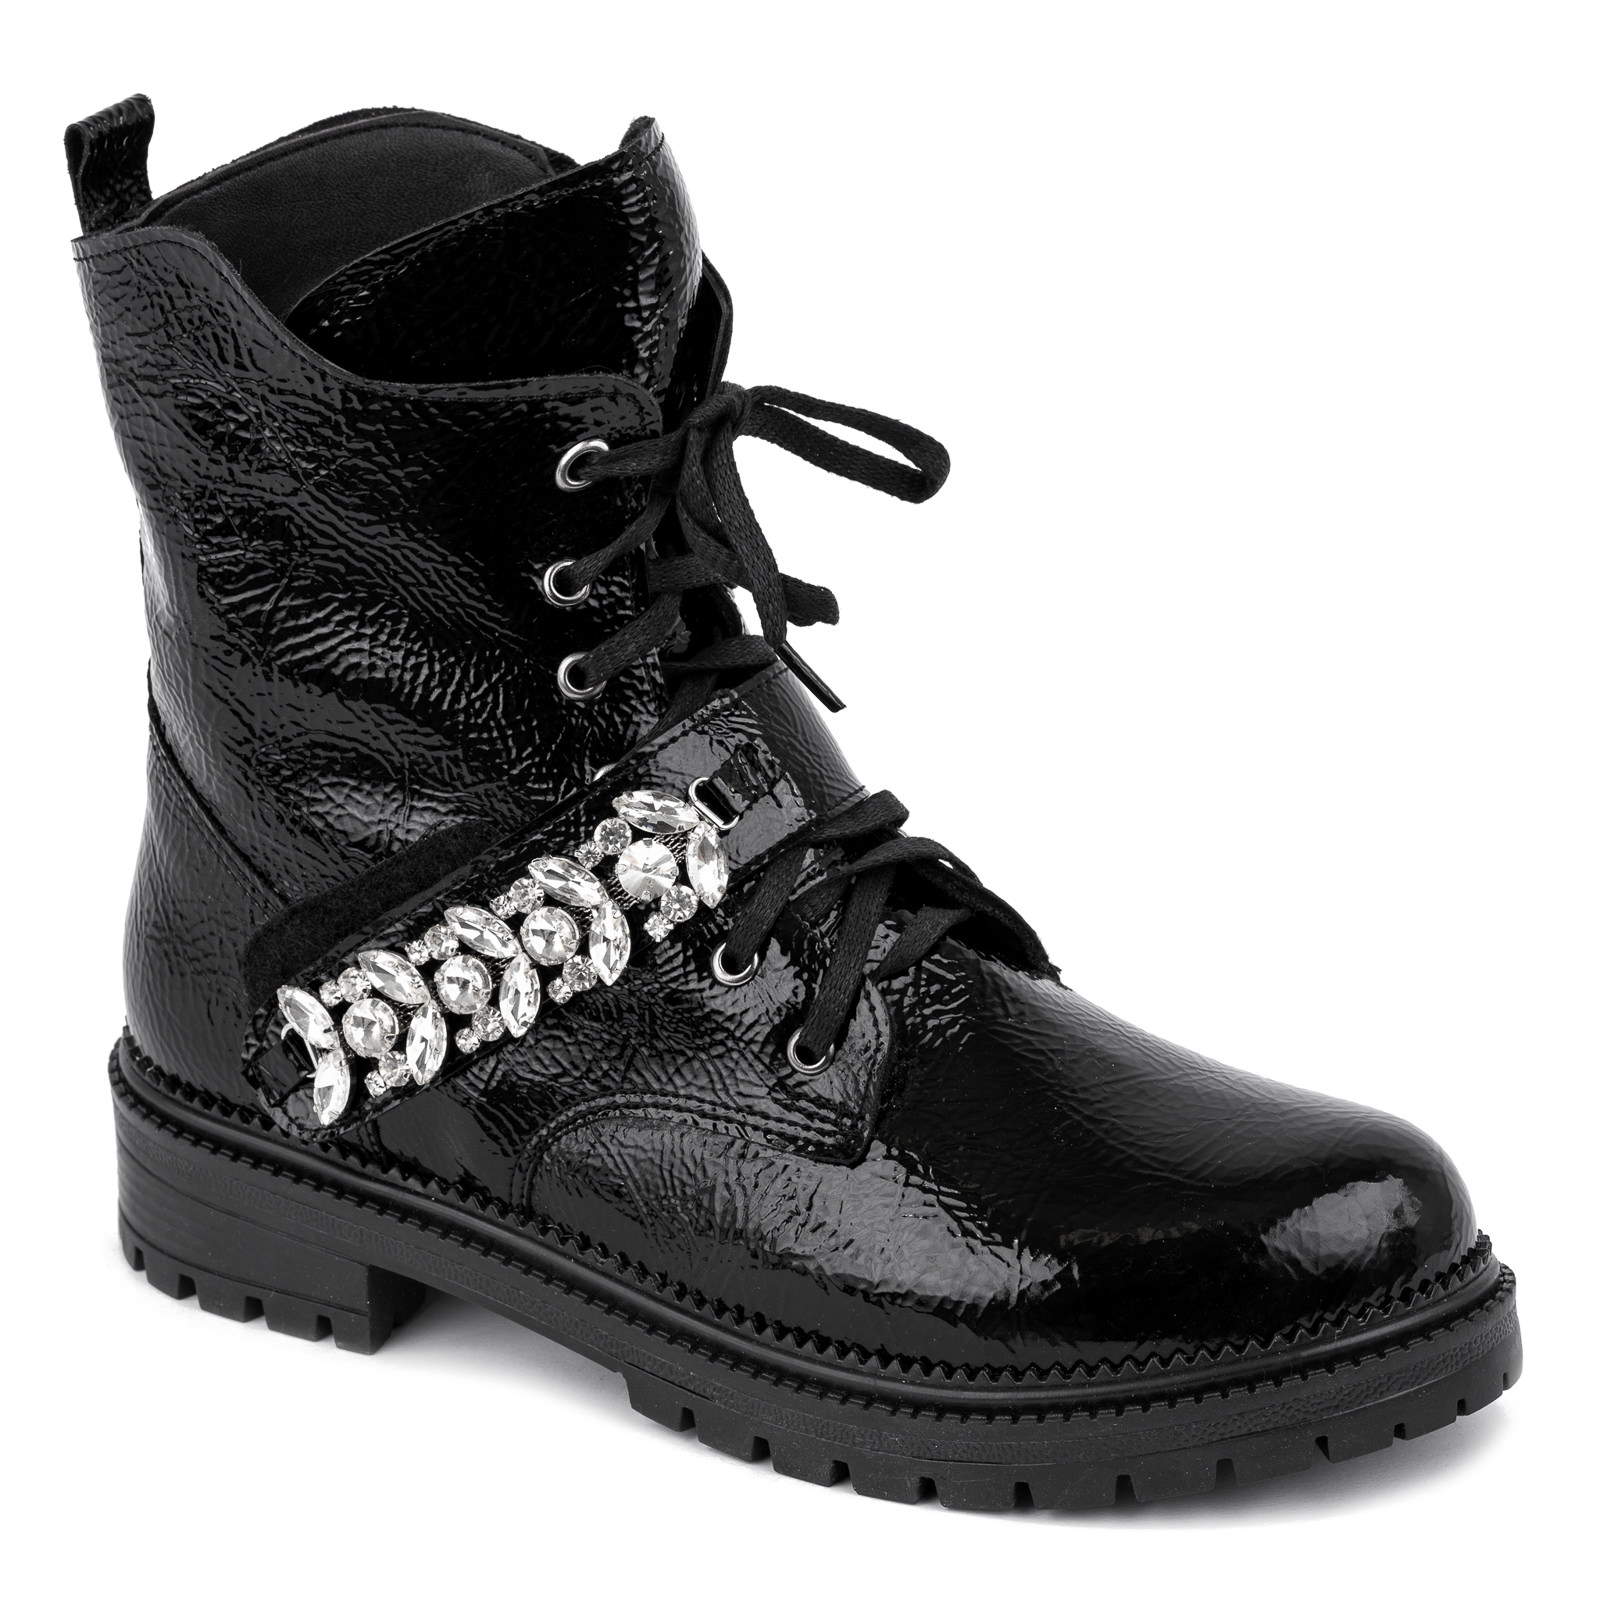 PATENT ANKLE BOOTS WITH ORNAMENTS - BLACK